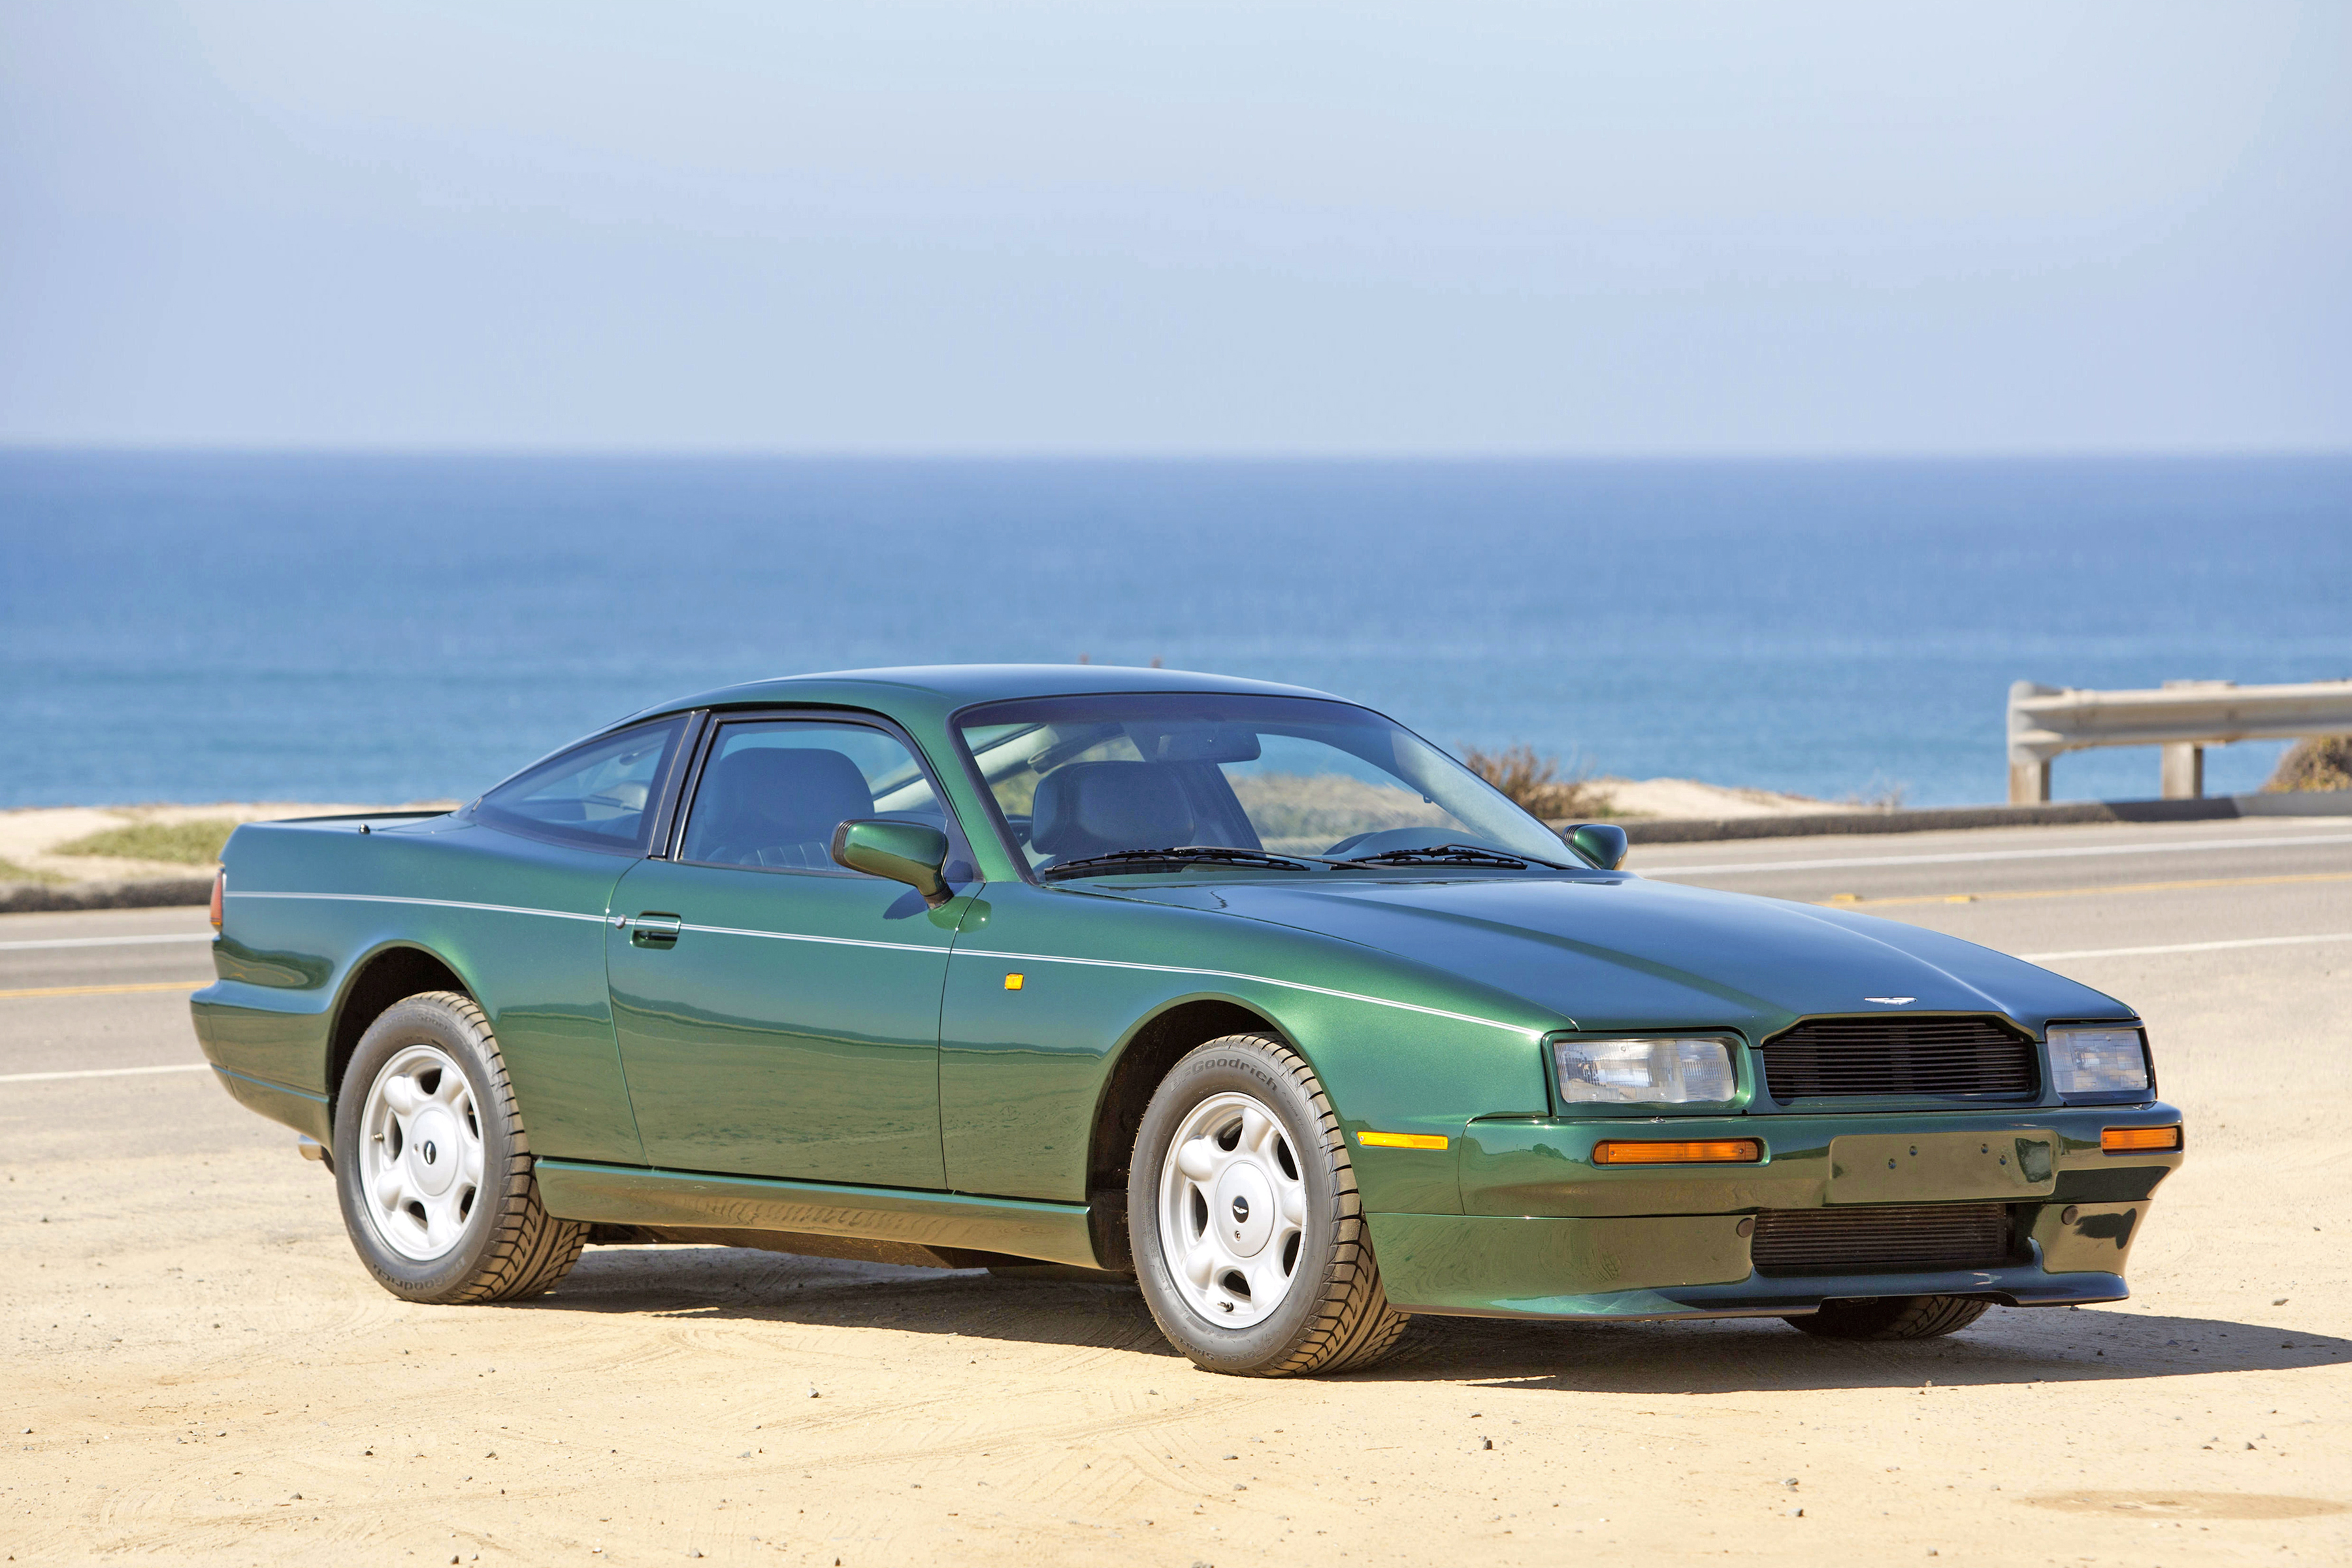 The Aston Martin Virage – Rough Around the Edges but Still One of the Best  – Automotive Views